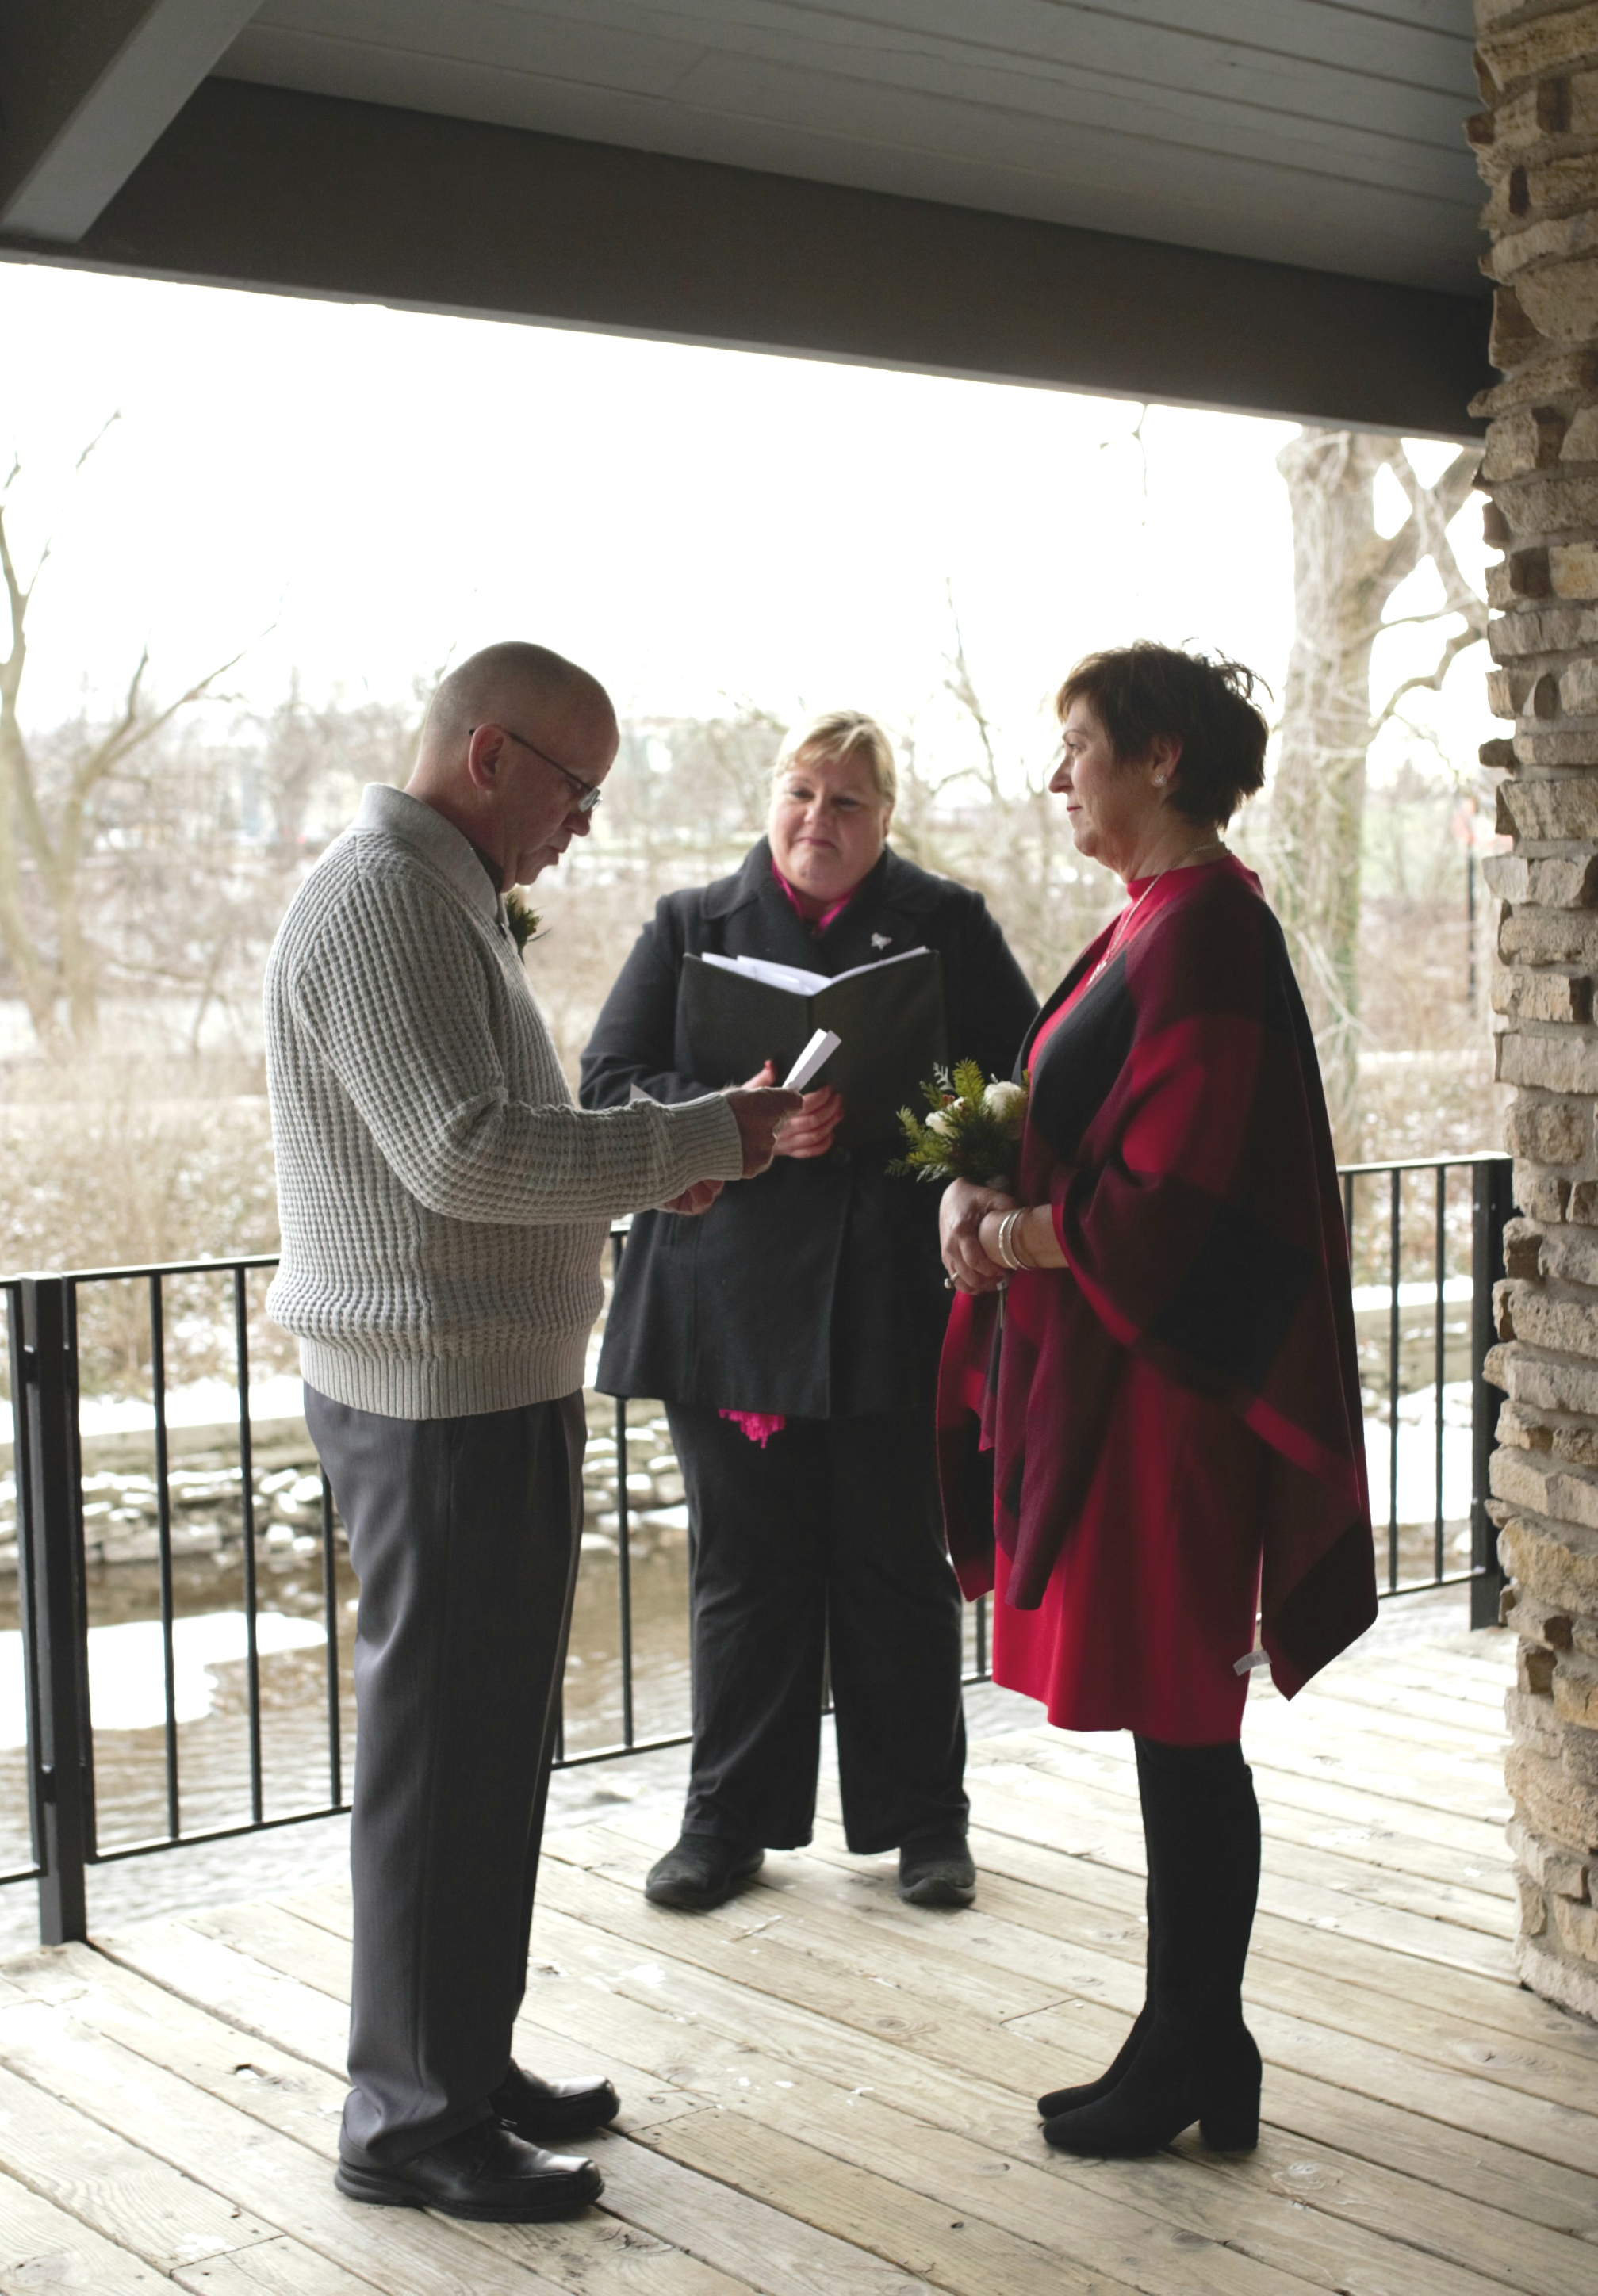 A couple holds hands in a pavilion along the riverwalk as a minister marries them outdoors